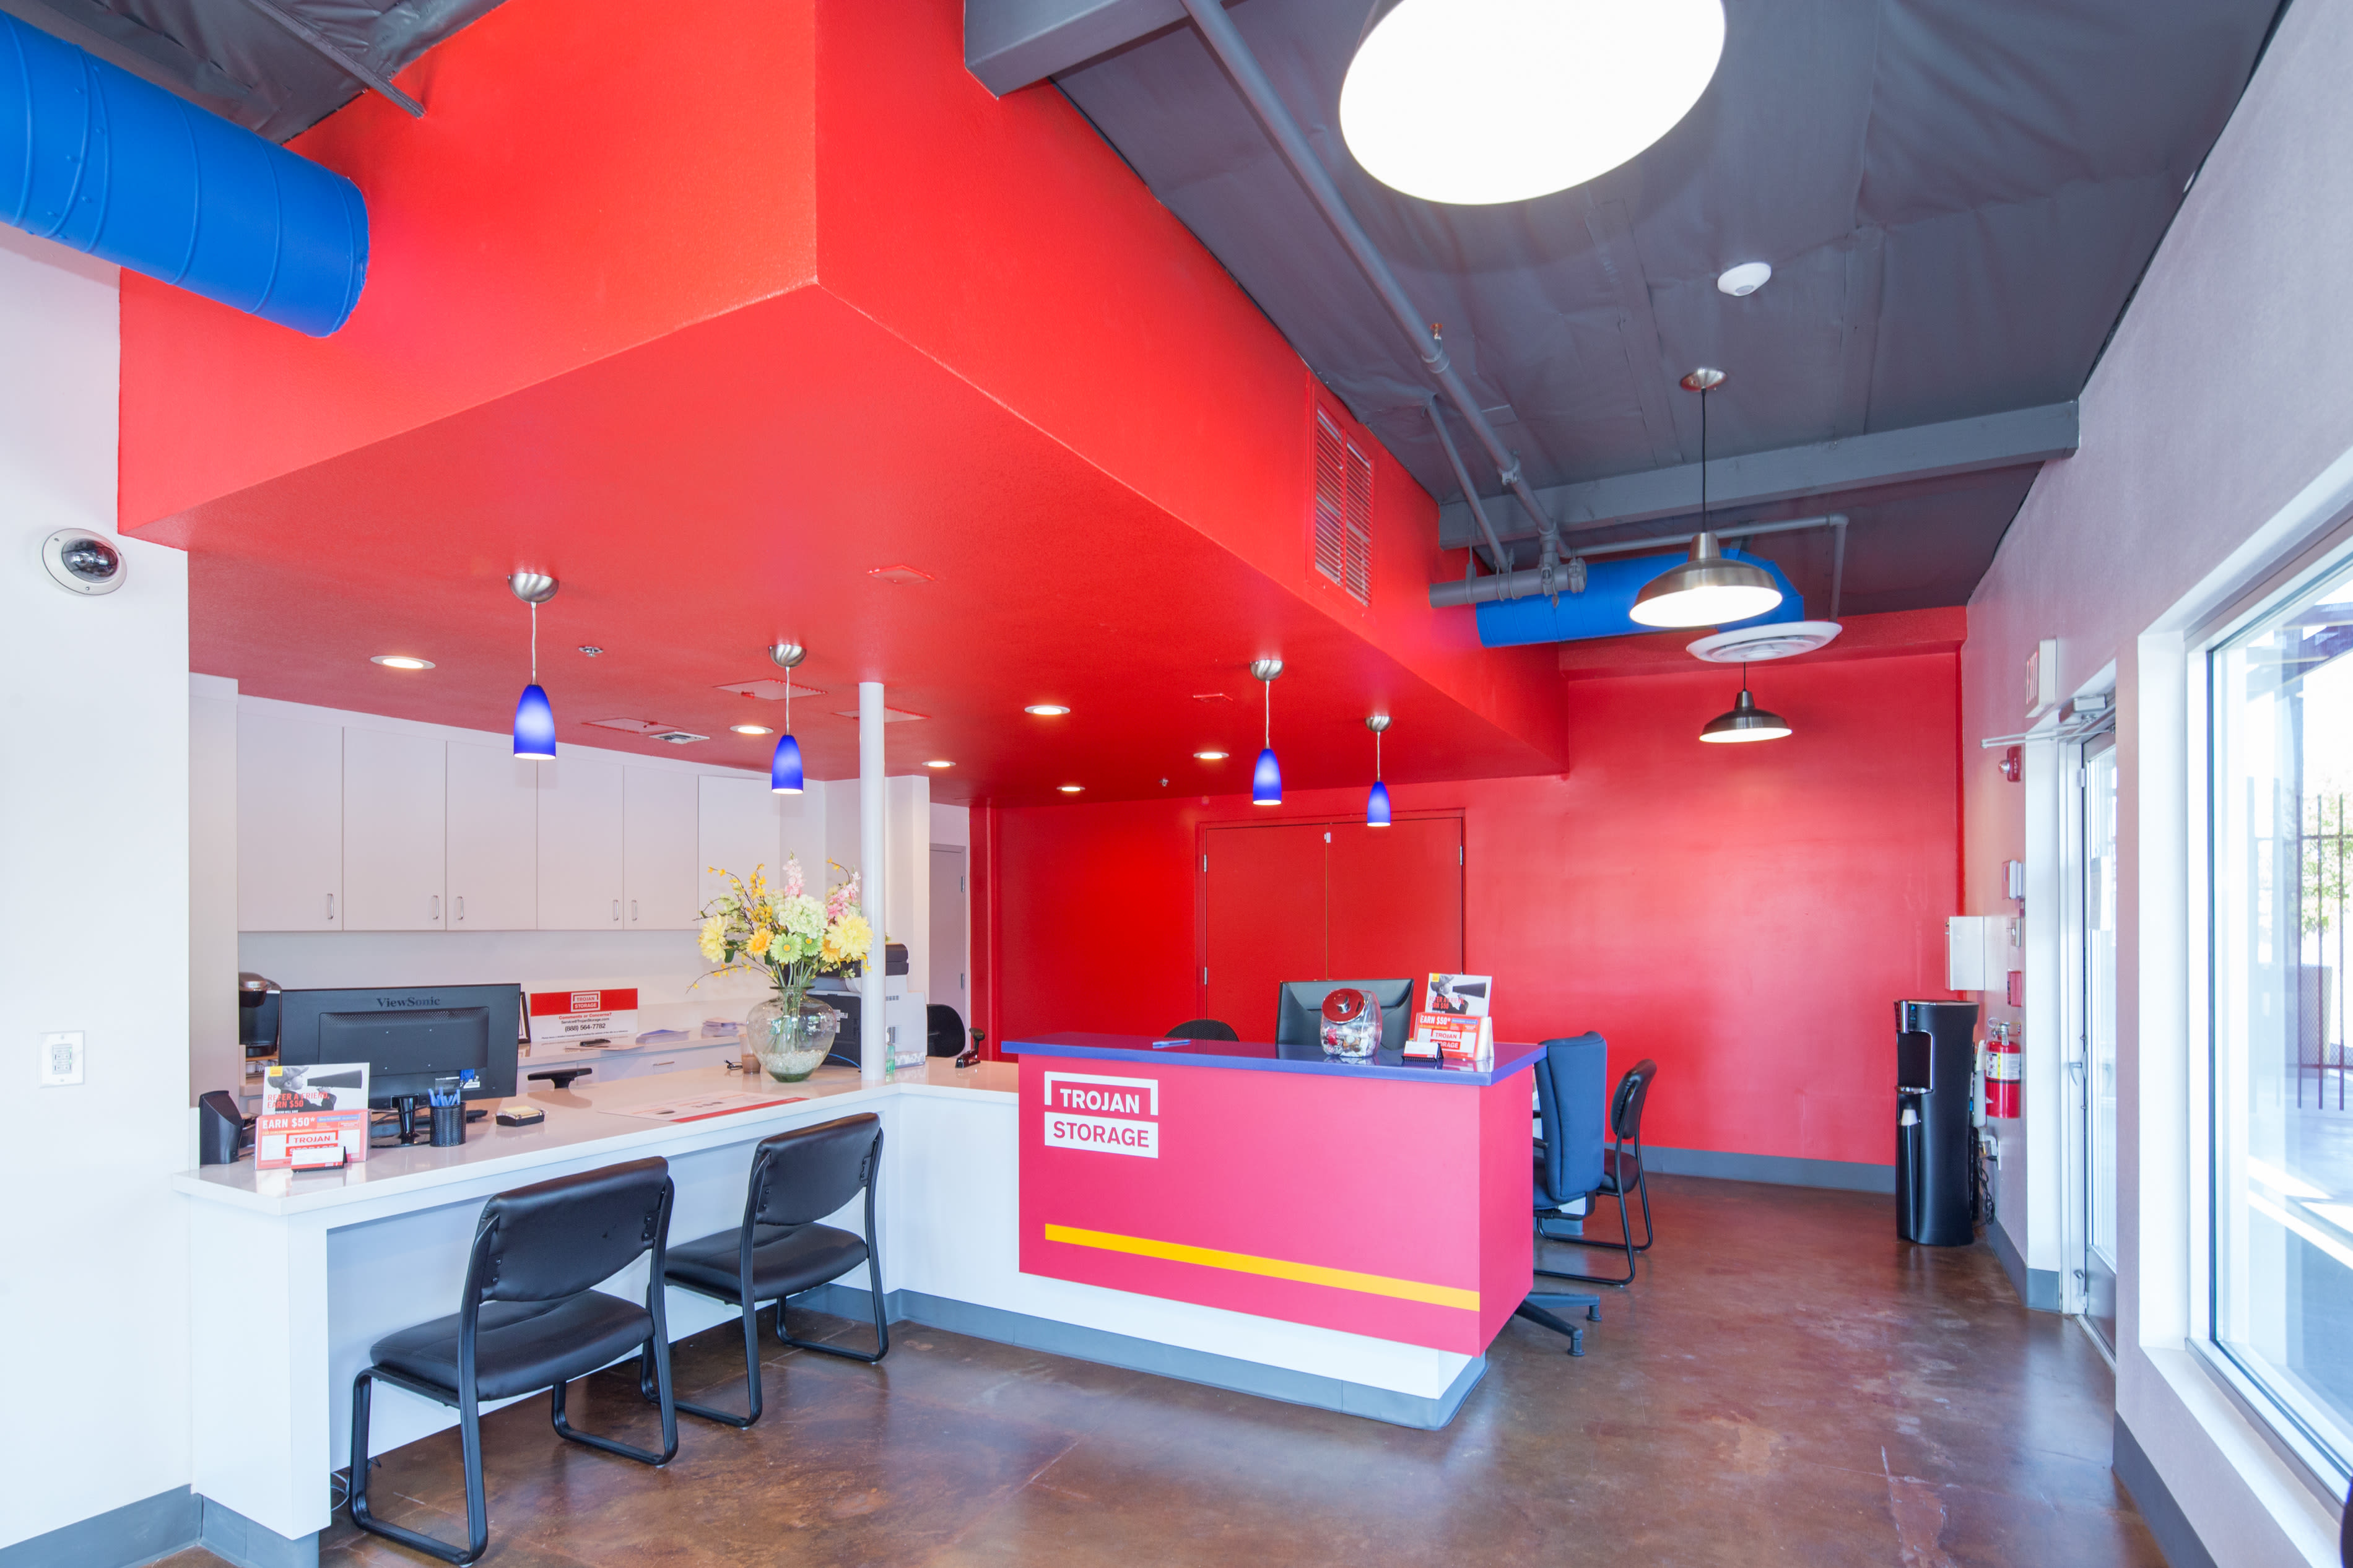 Clean and modern leasing office at Trojan Storage of Sacramento in Sacramento, California